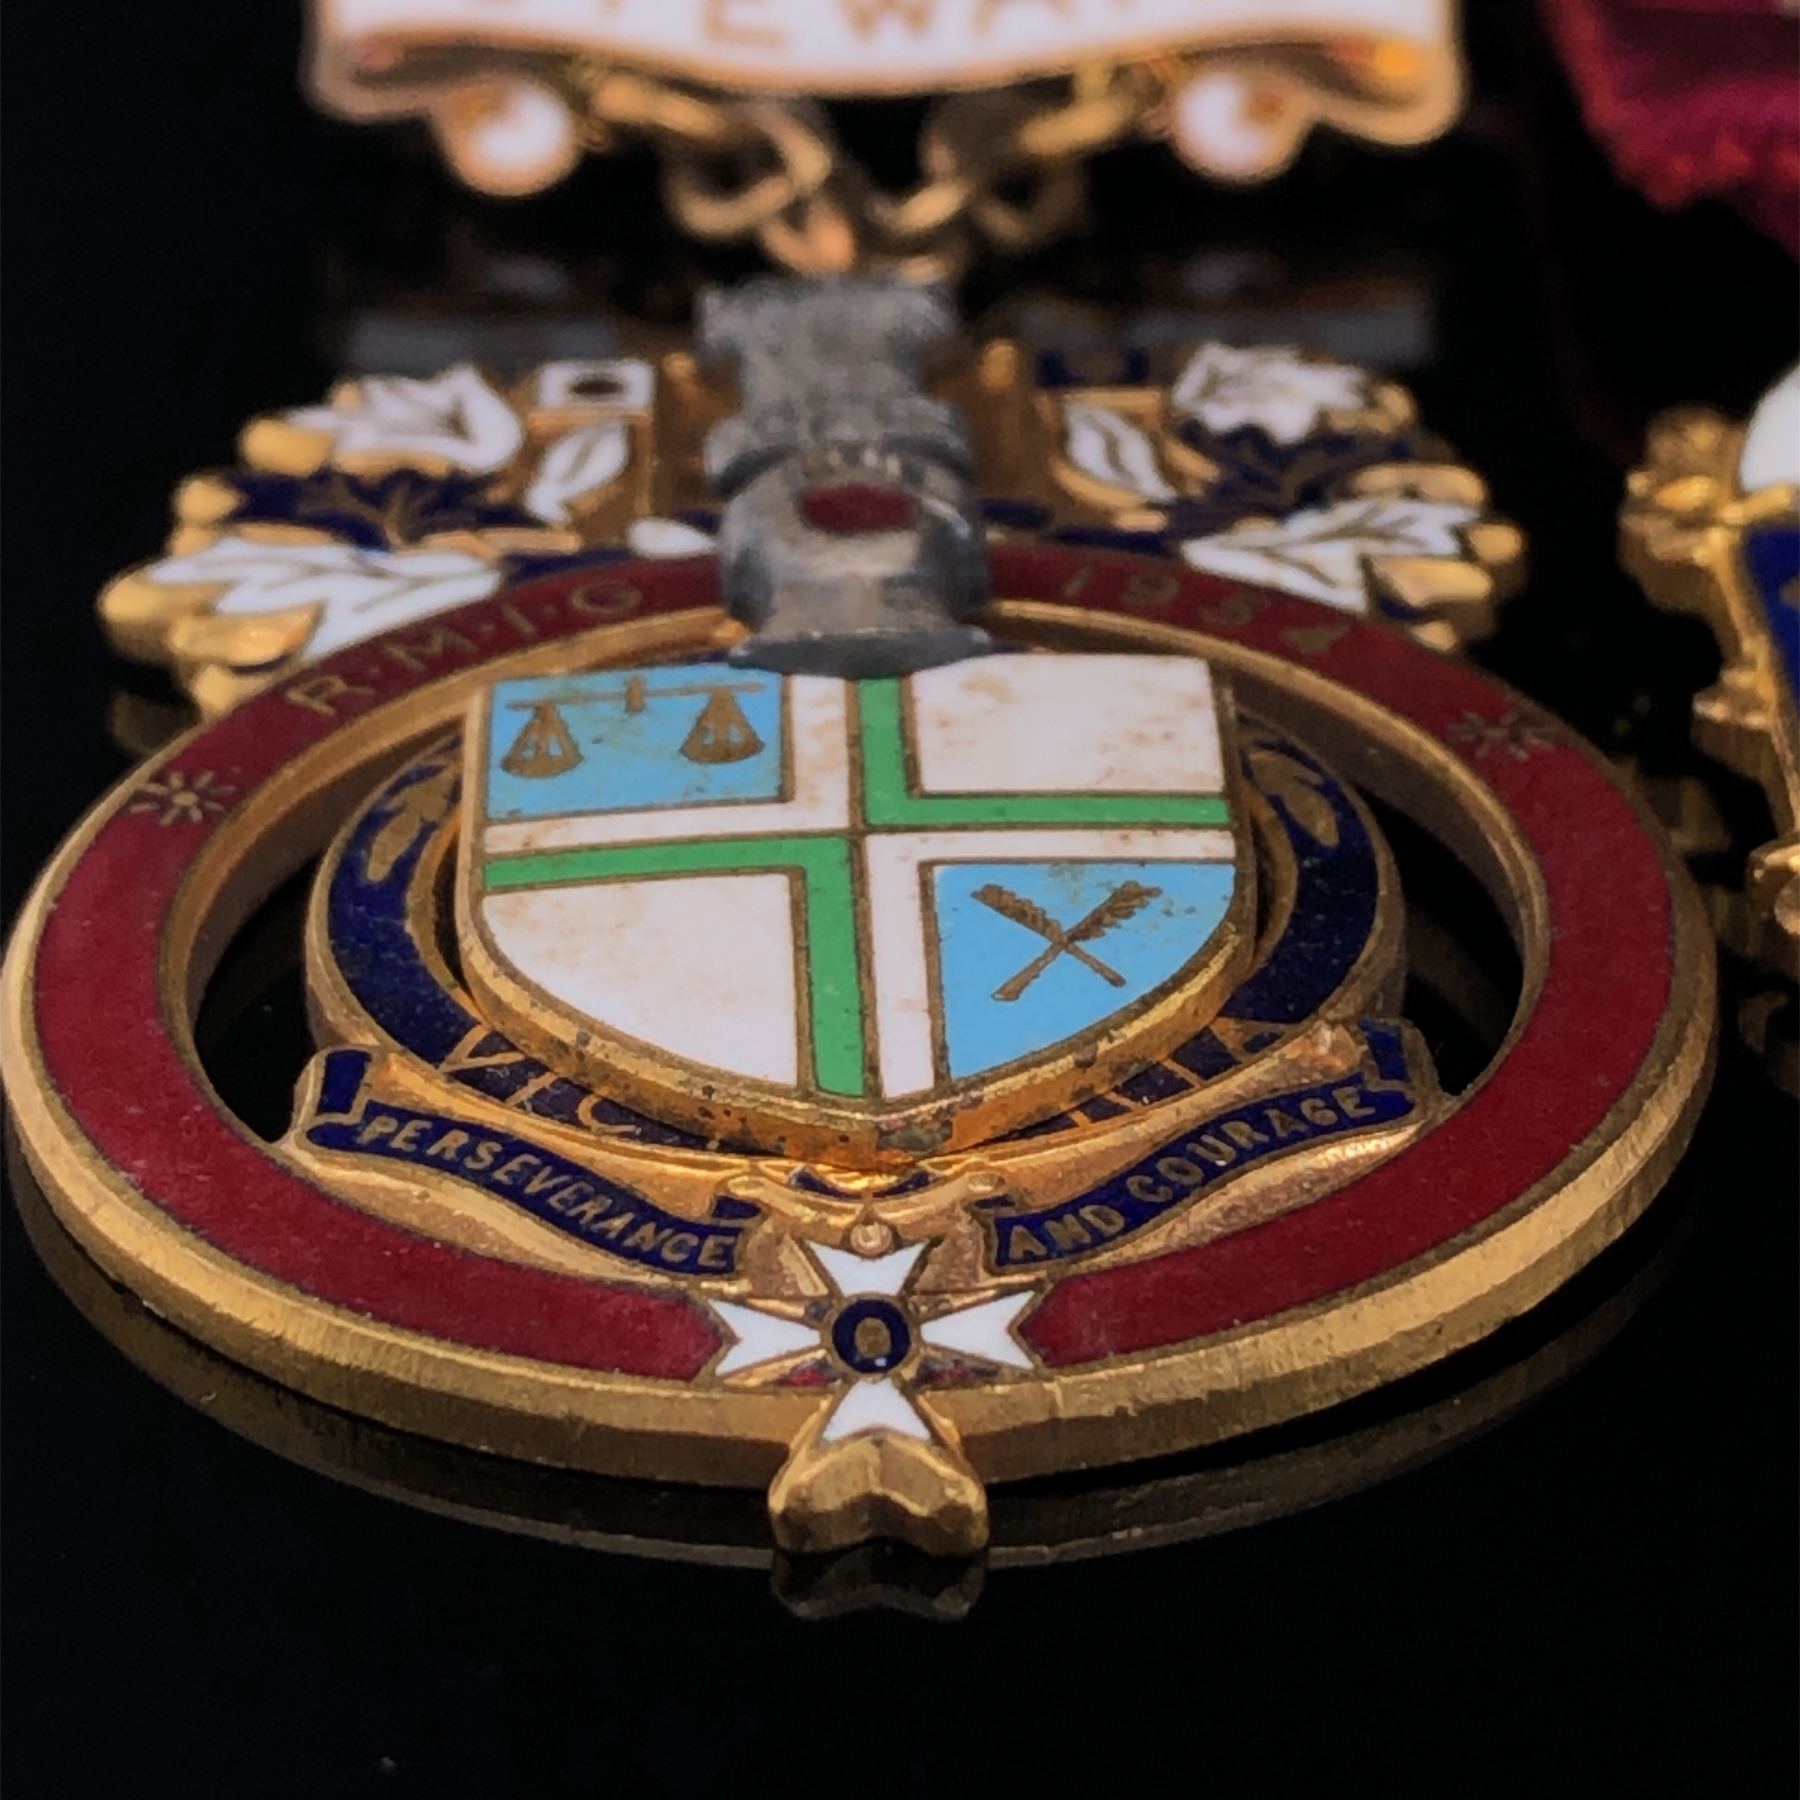 A HALLMARKED 9ct GOLD AND ENAMEL MAYORS MEDALLION, ENGRAVED WITH ENAMEL BANNERS 1951-54, AND FLOREAT - Image 3 of 11